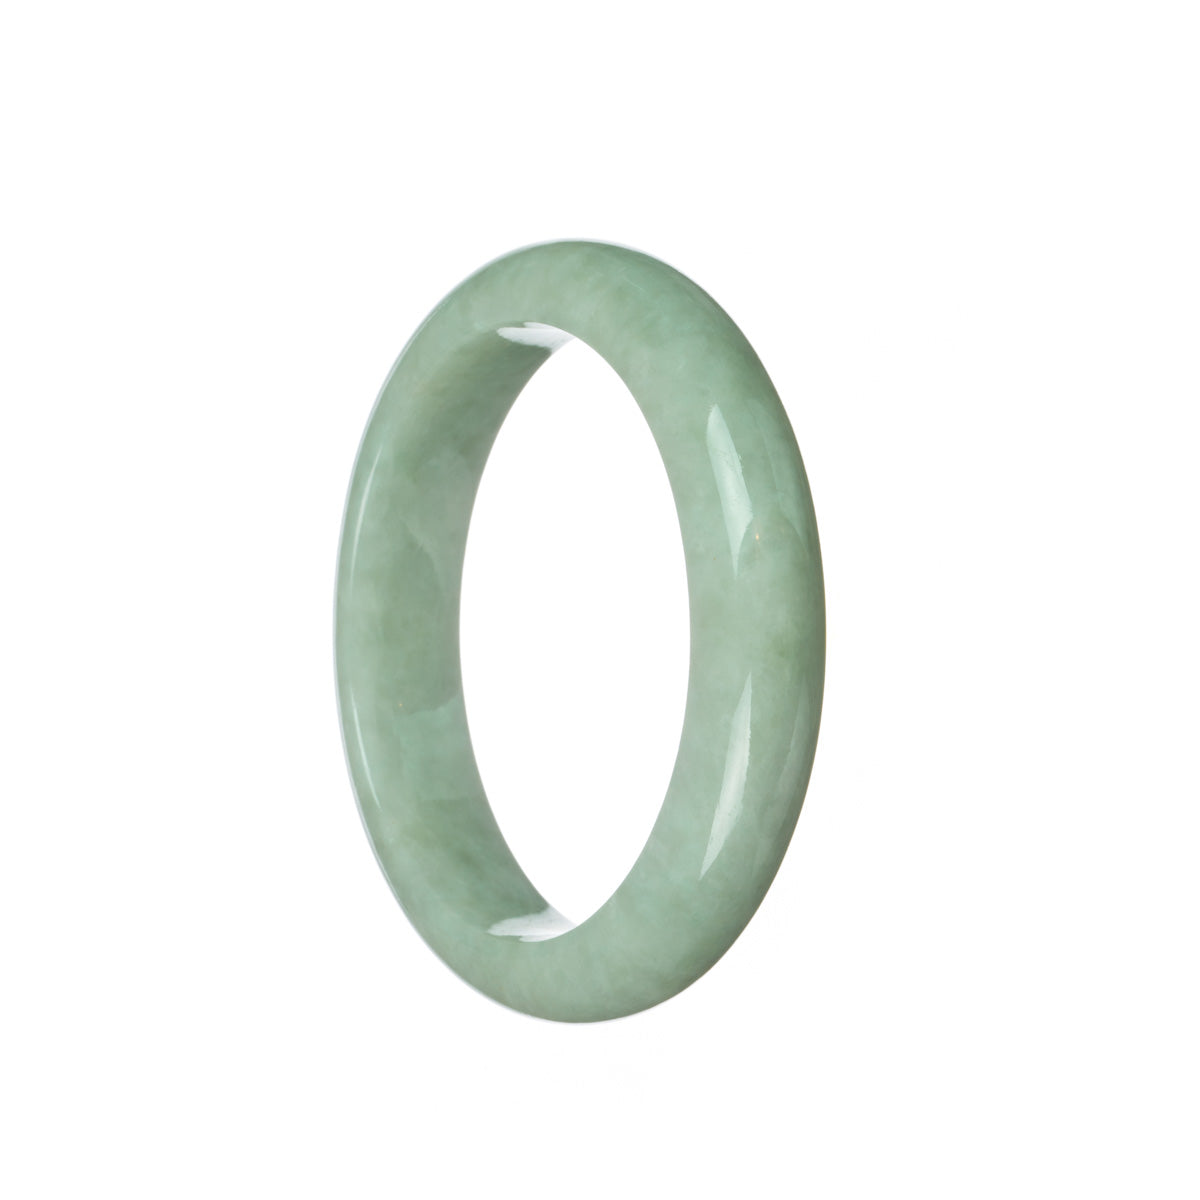 A beautiful light green Burma Jade bangle, featuring a half moon design, measuring 58mm in diameter. Perfect for adding a touch of elegance to any outfit.